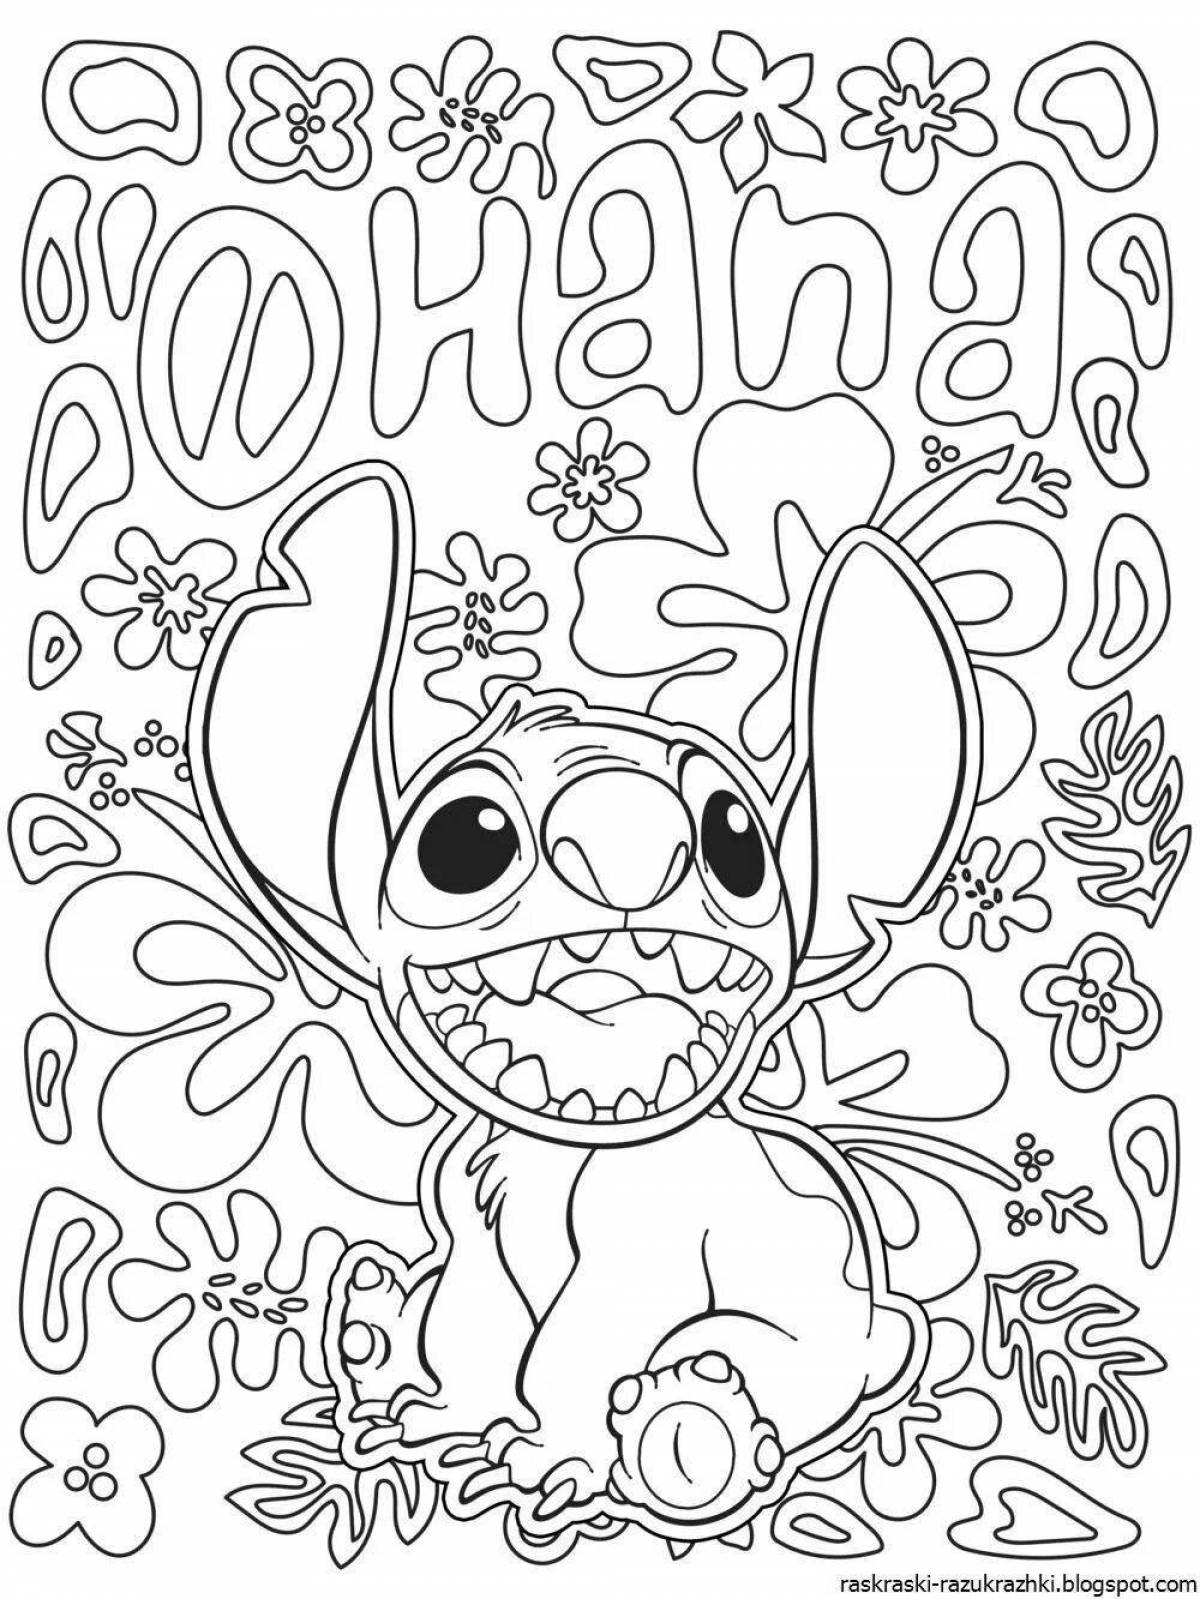 Vivacious coloring page stitch for girls